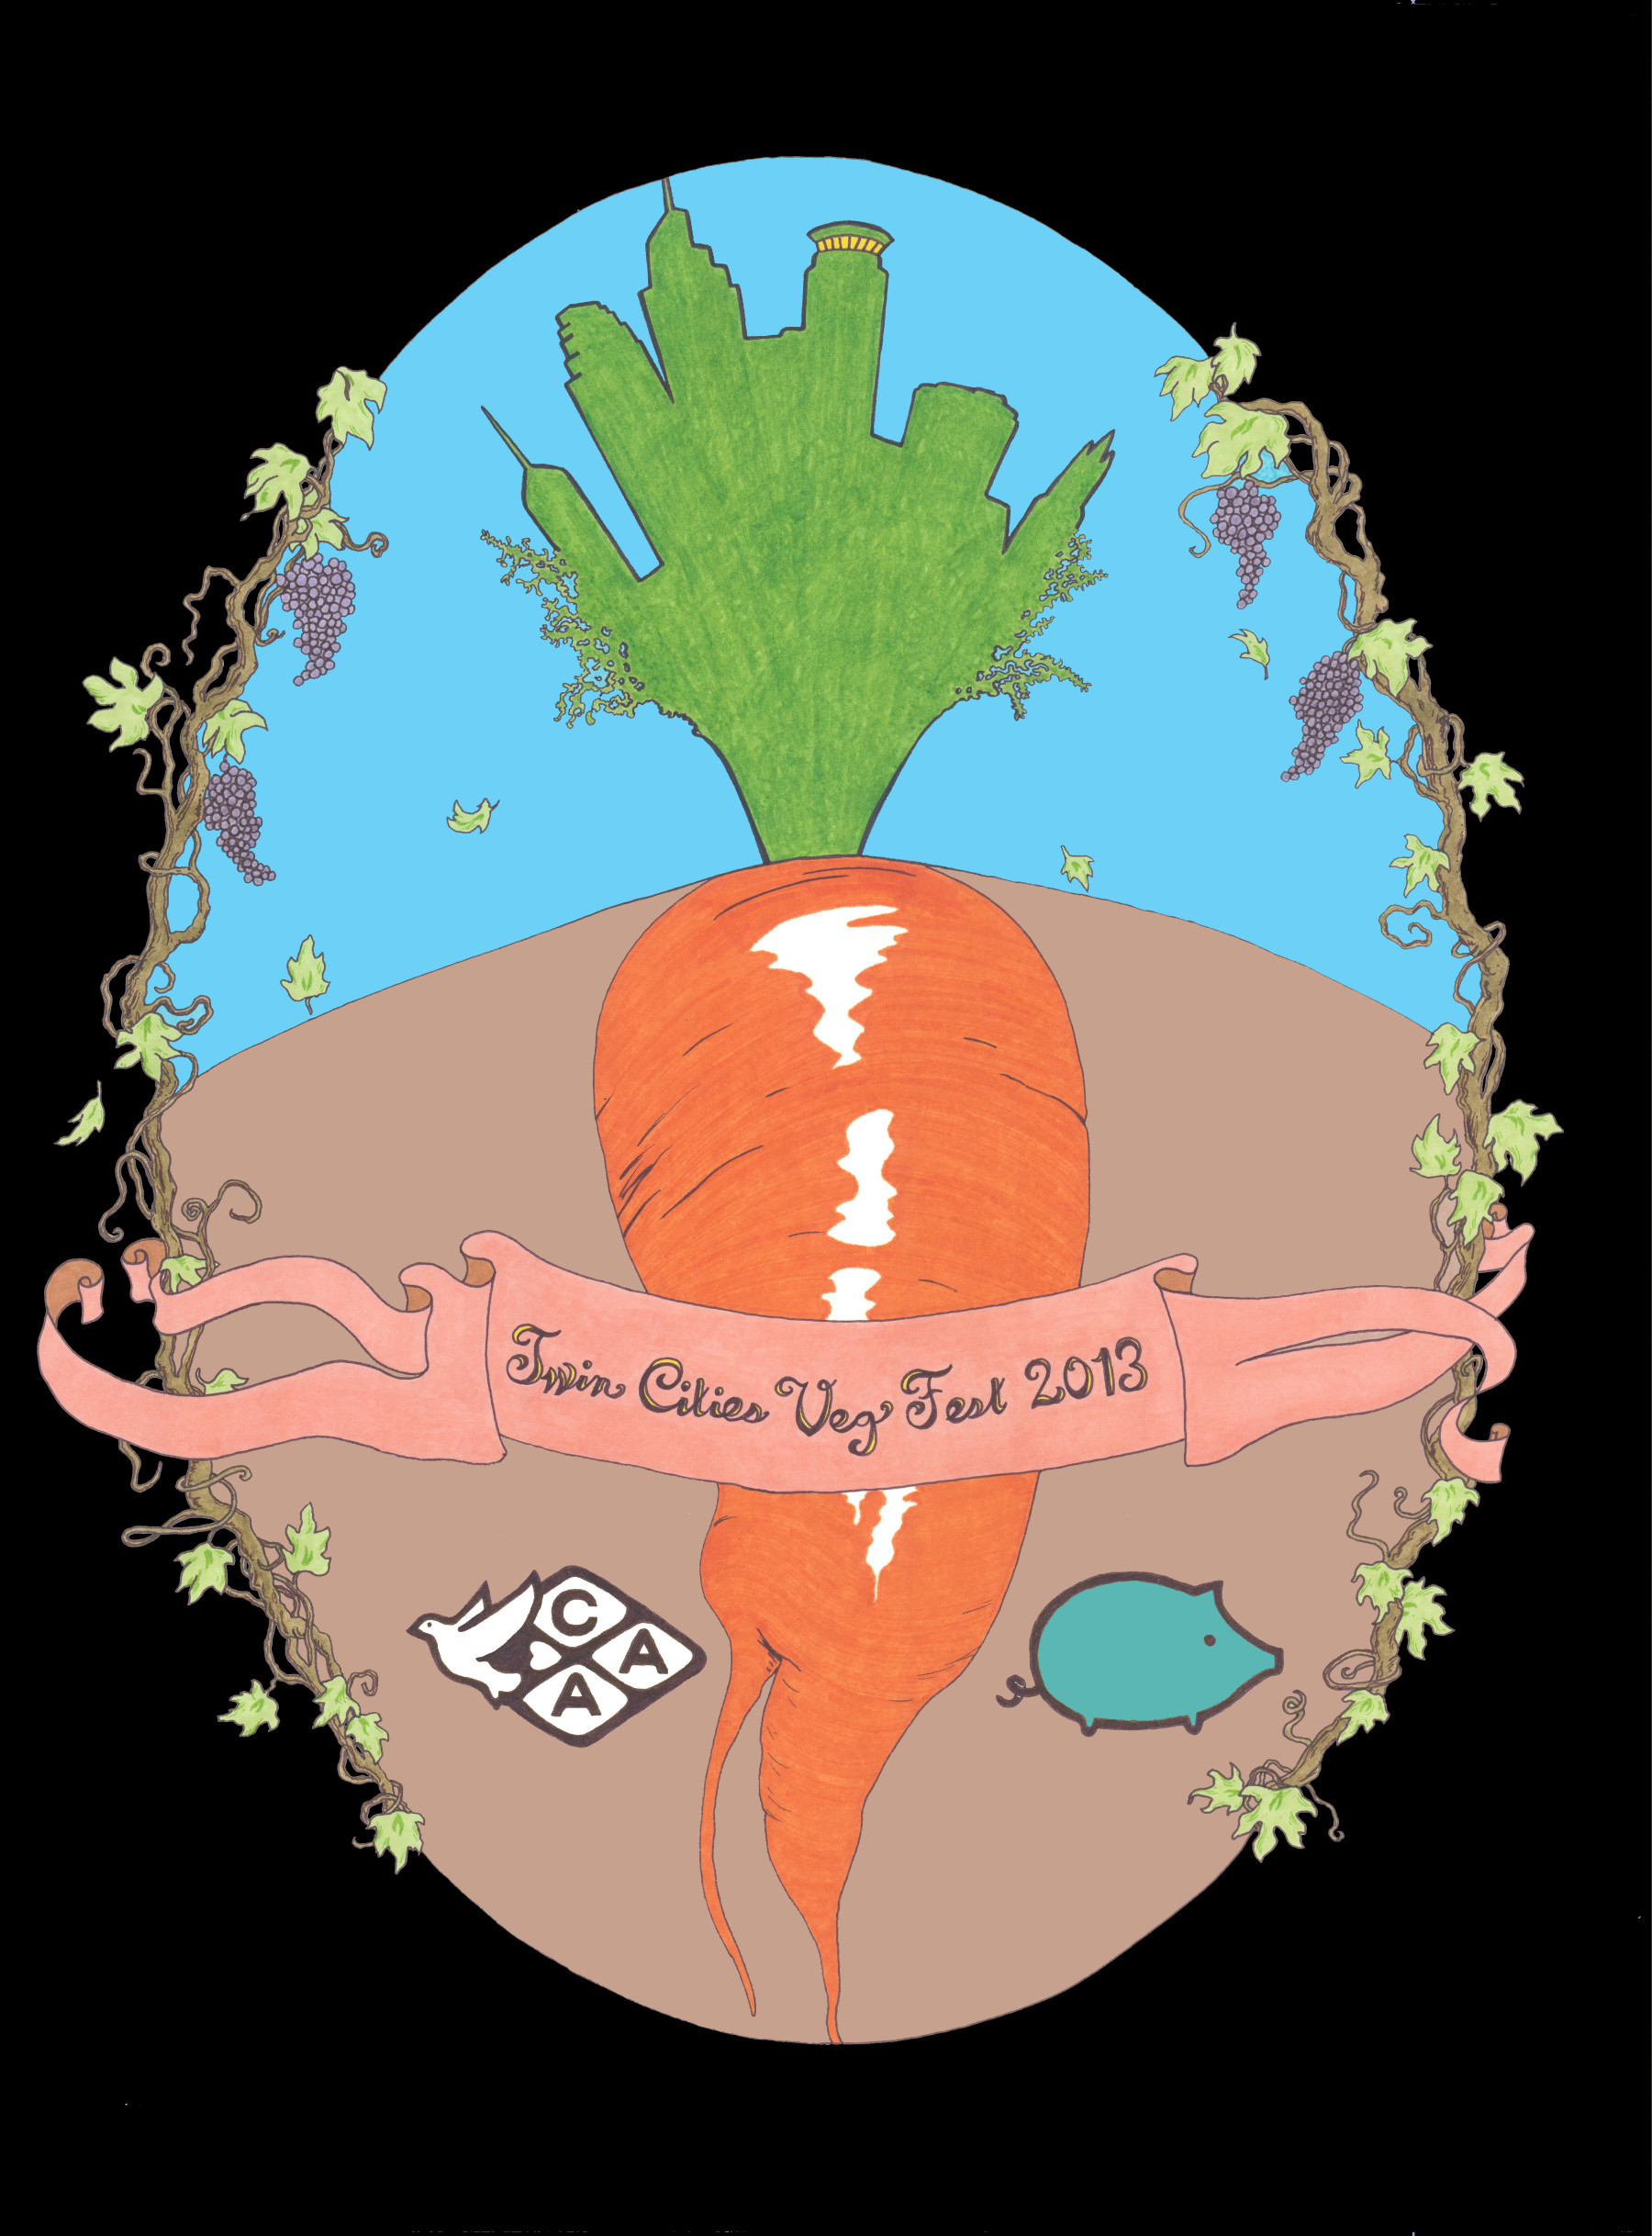 Twin Cities Veg Fest poster by Shannon Kimball